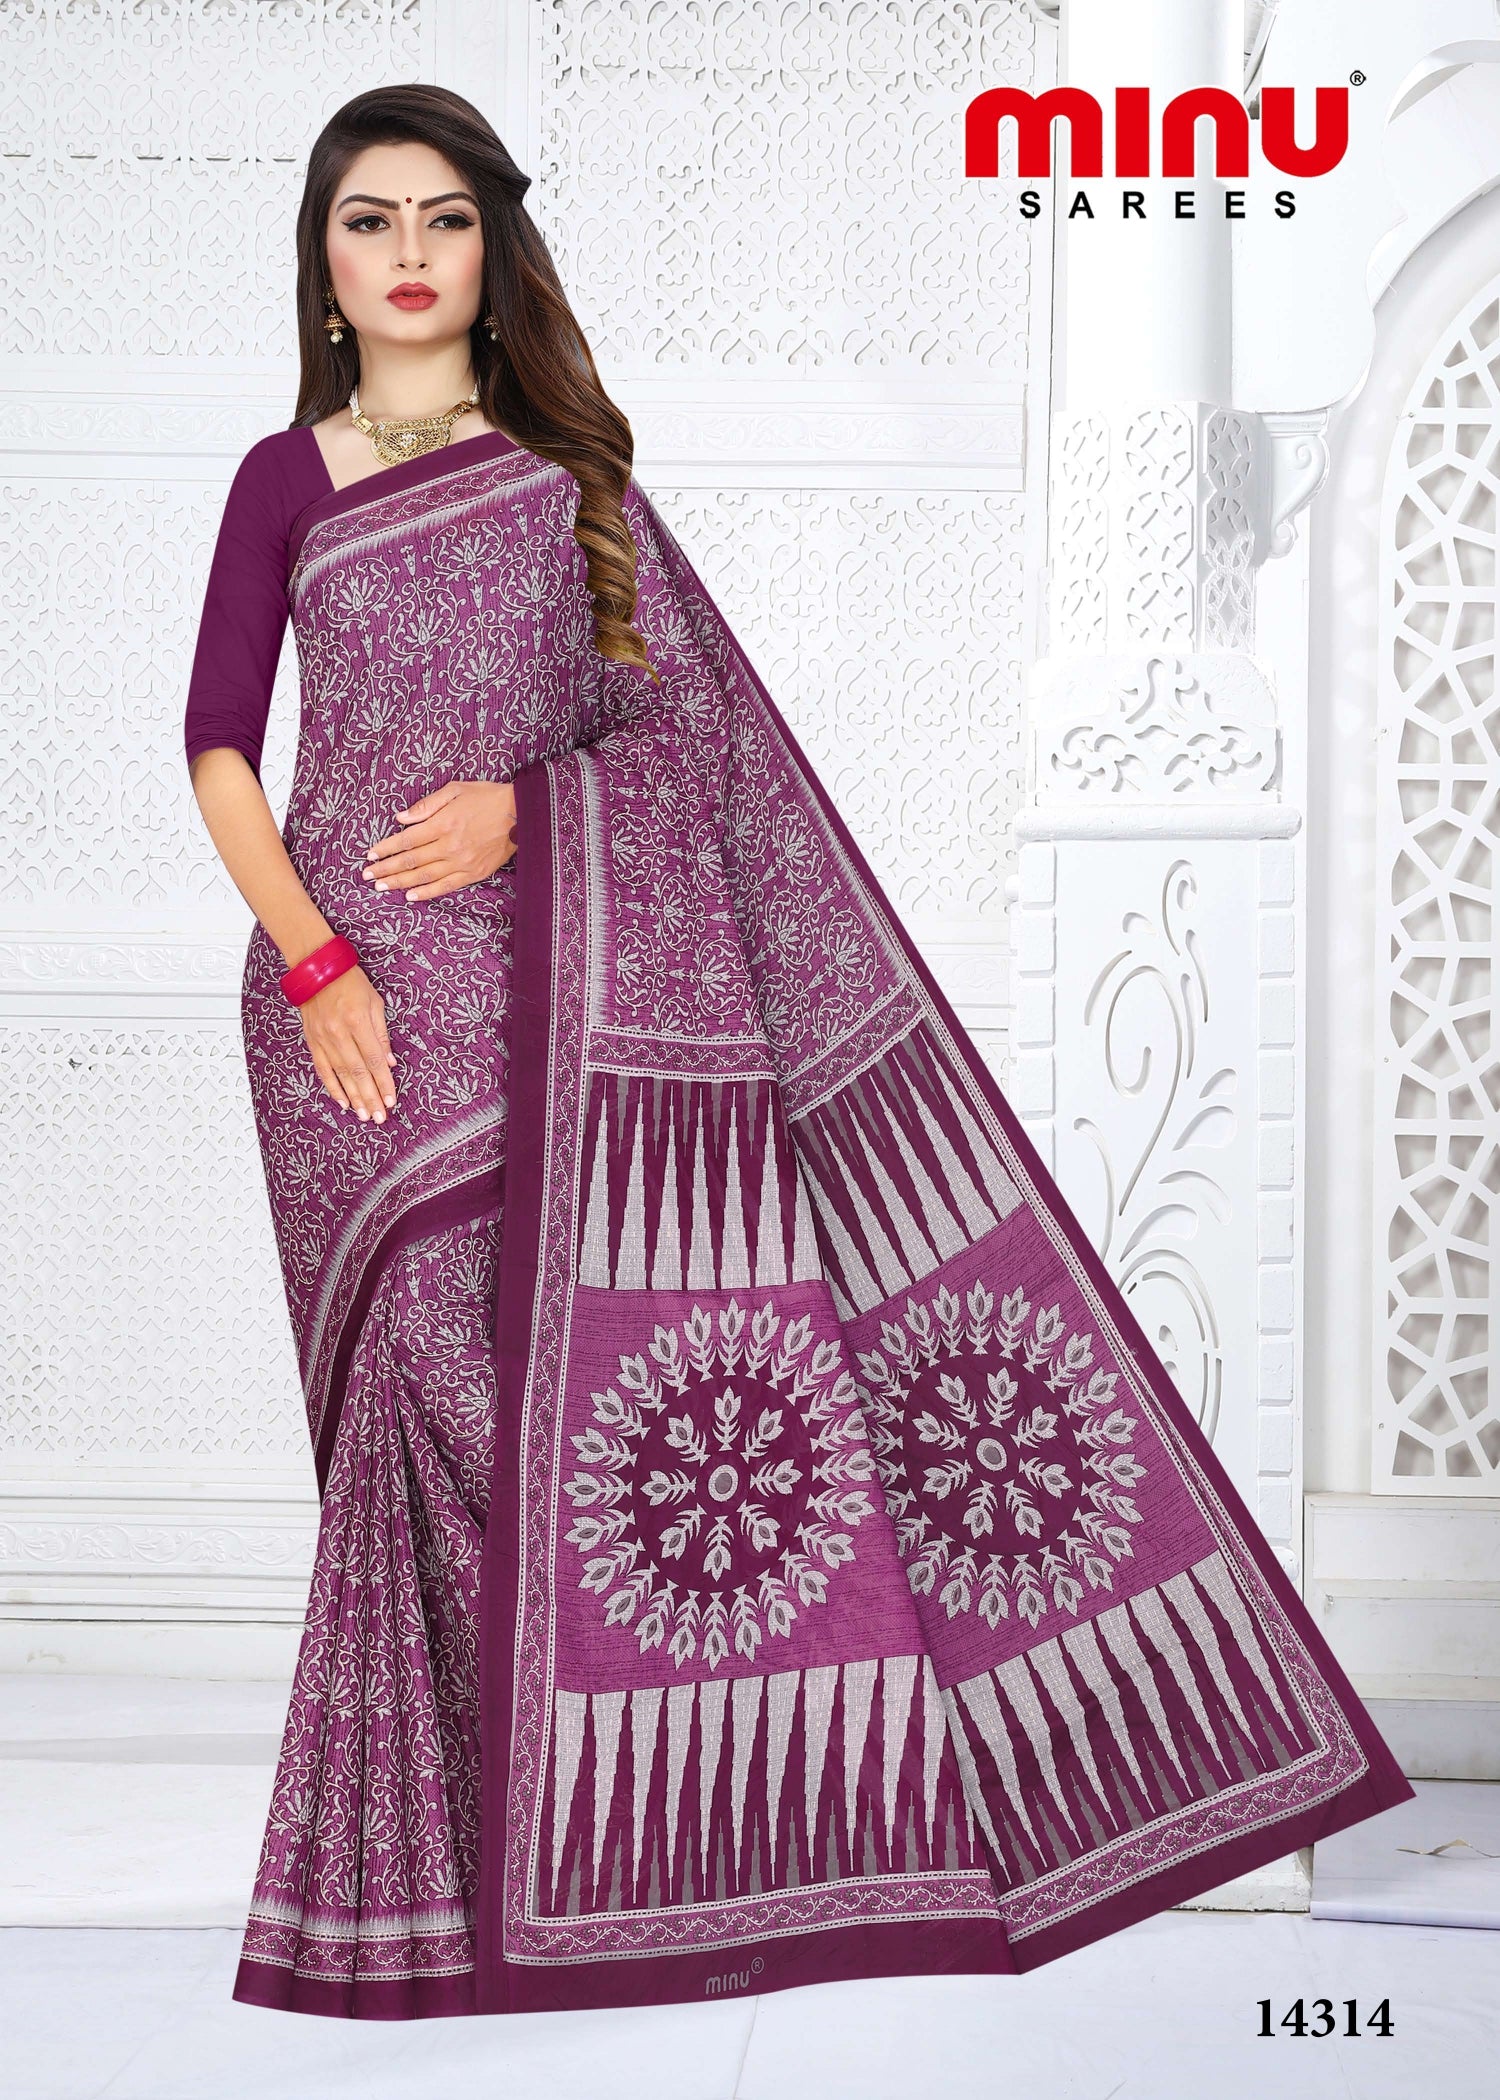 Top-quality red printed saree wearing woman wholesale online